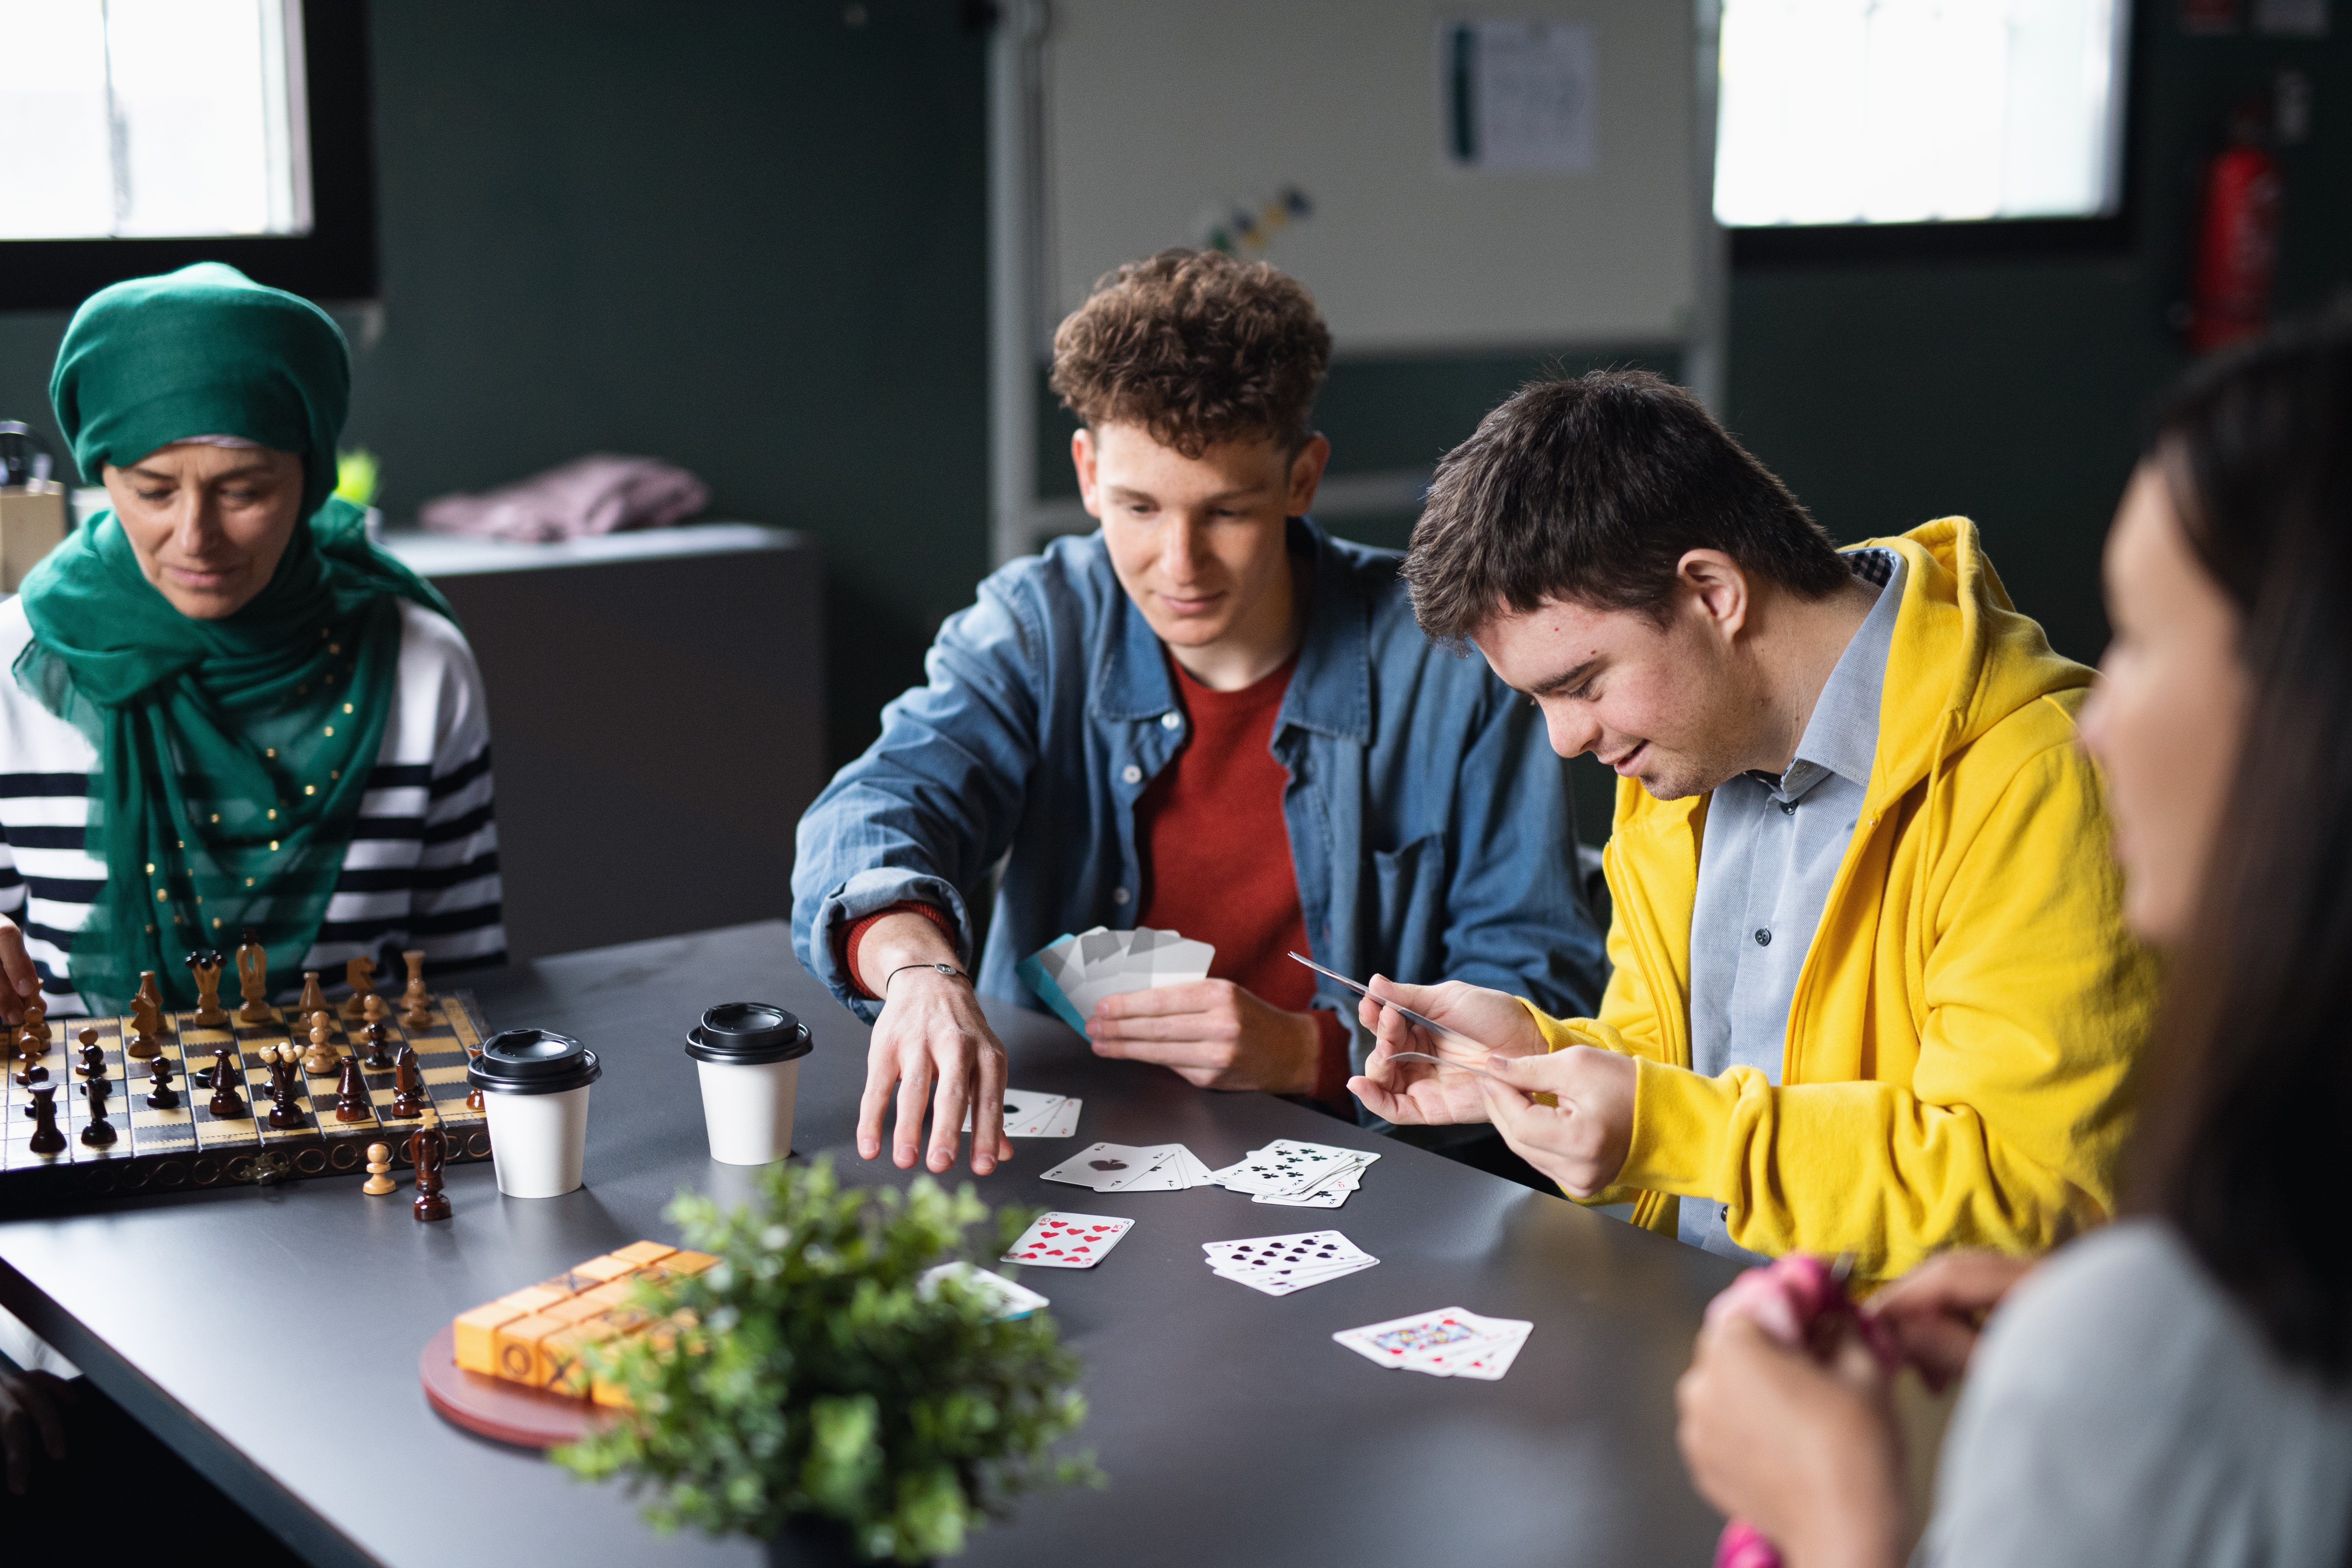 group of people playing games in community including disabled person in a yellow jacket